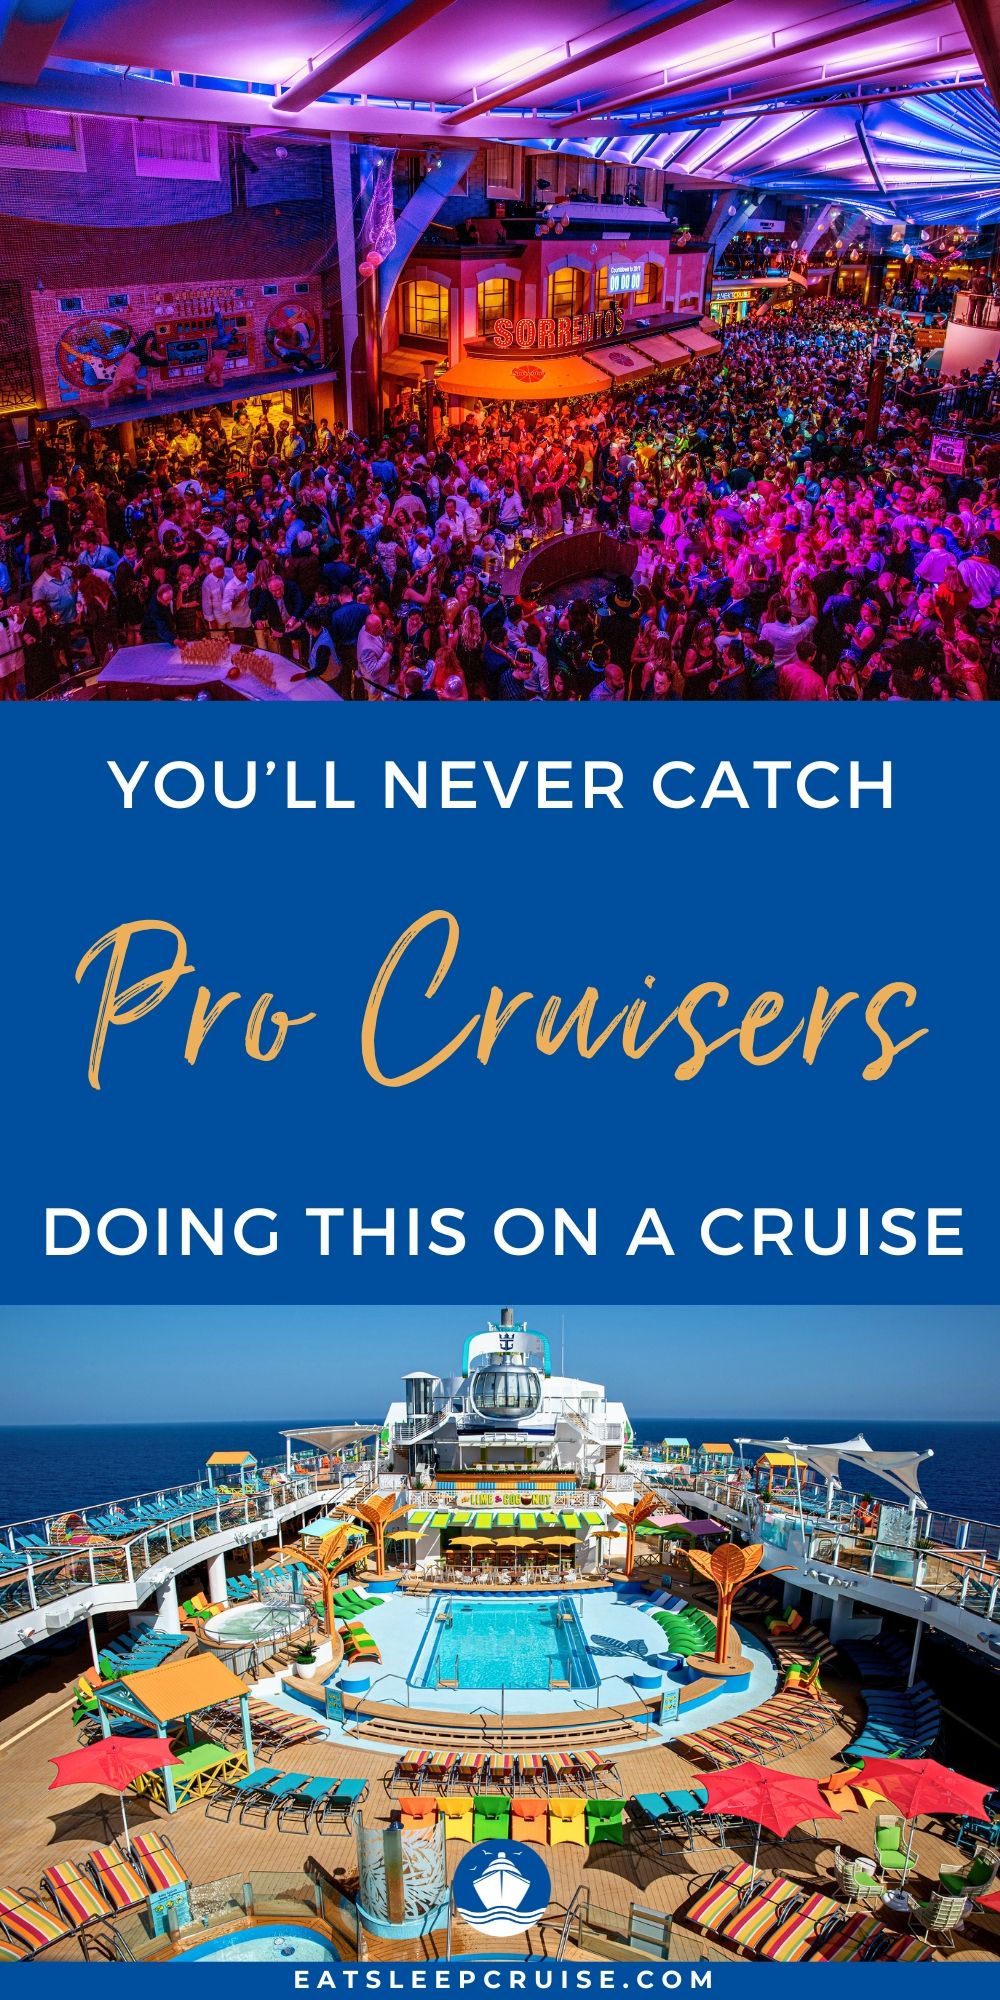 The 12 Things You’ll Never Catch Pro Cruisers Doing on a Cruise